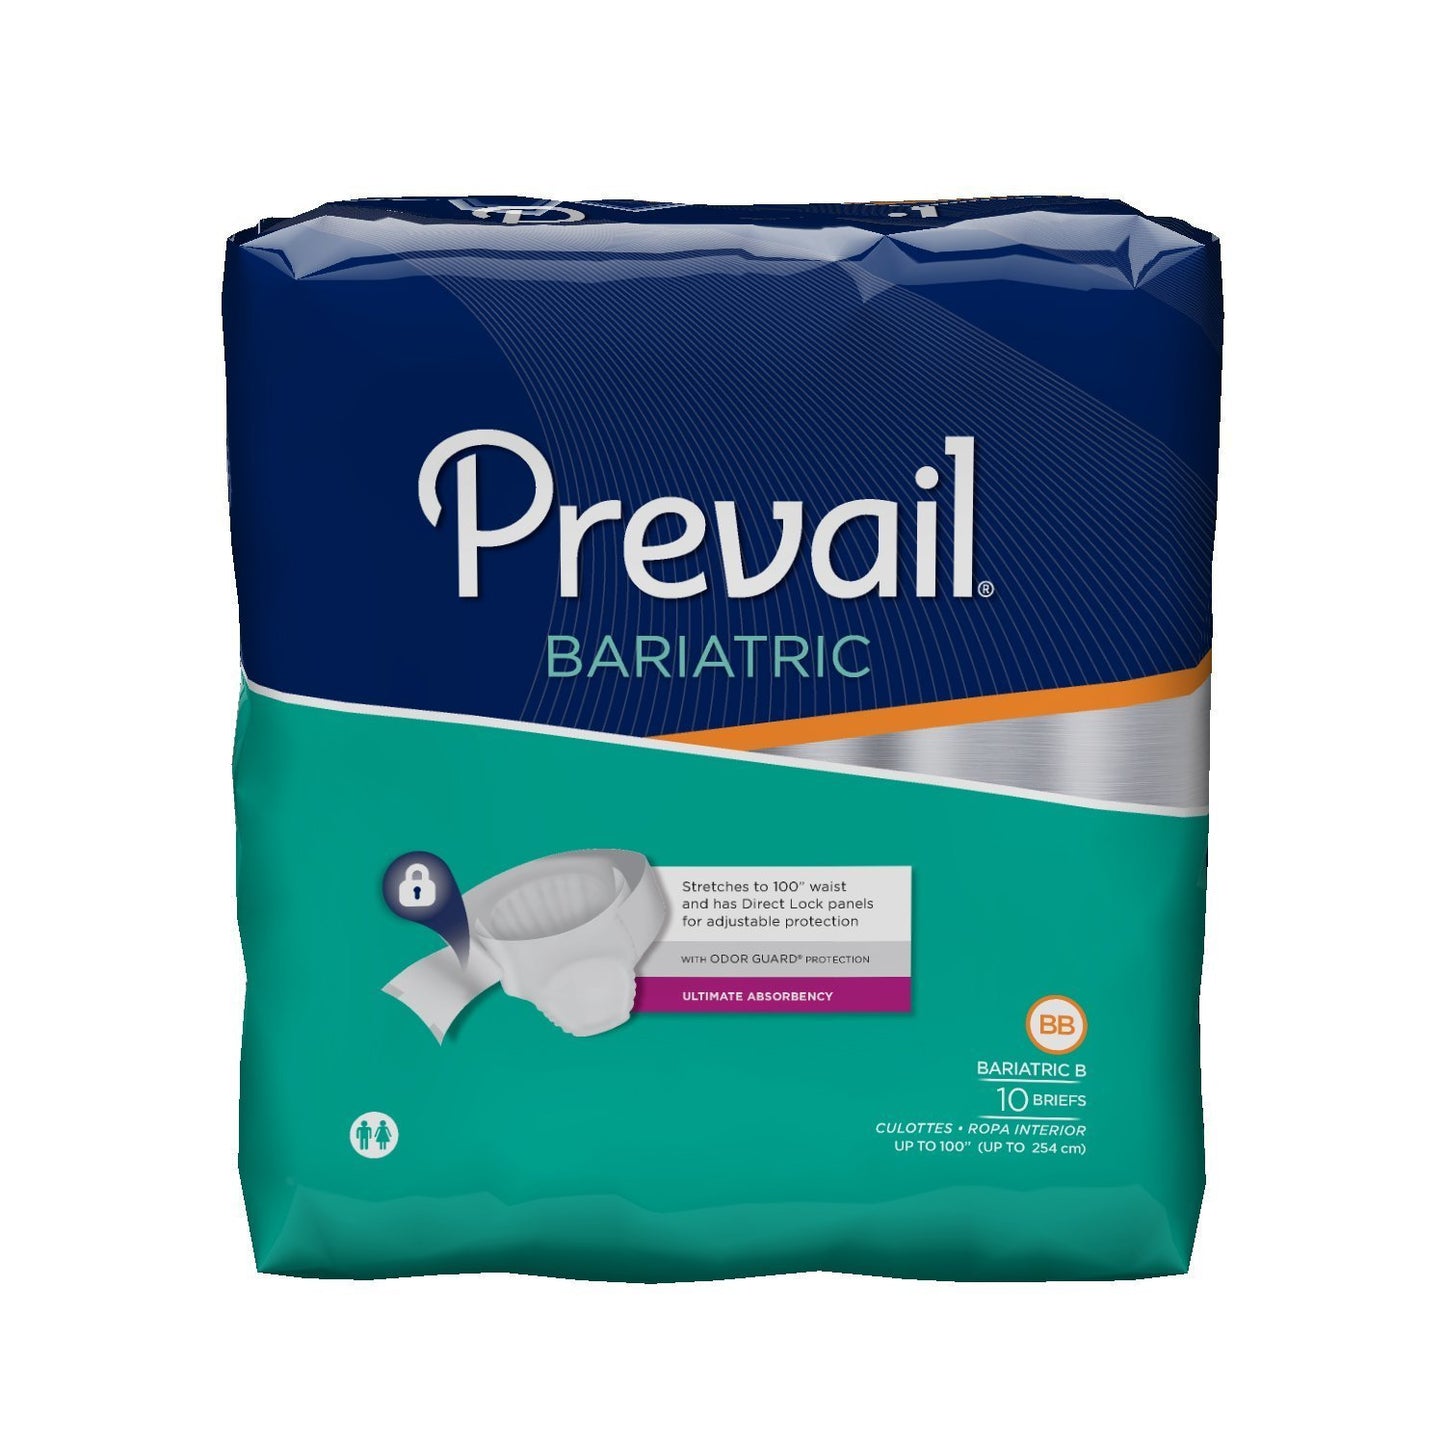 Prevail Disposable Heavy Absorbency Briefs